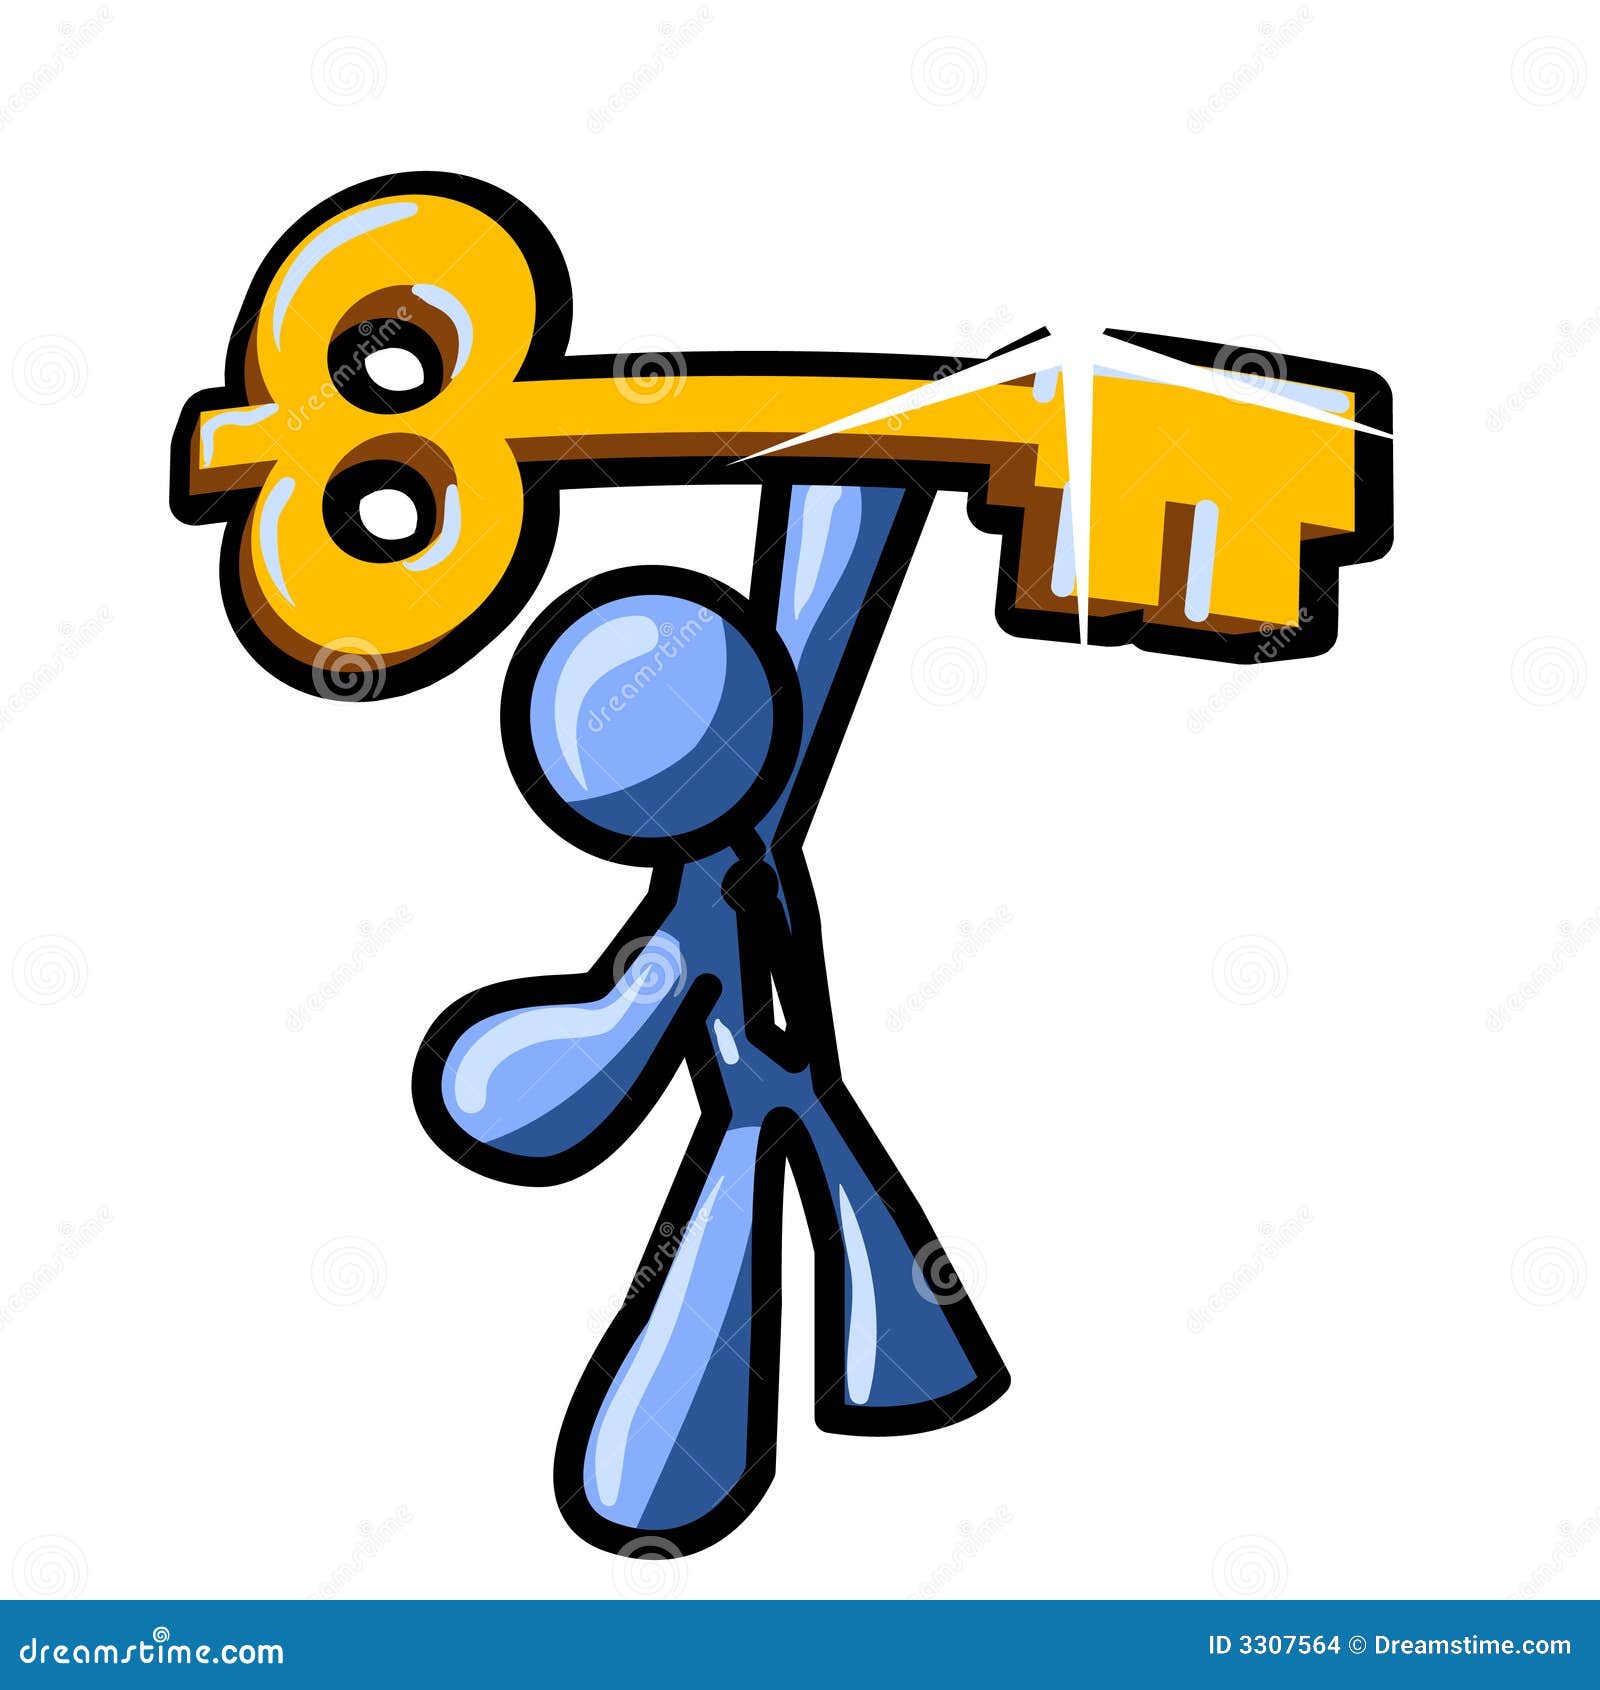 free clipart key to success - photo #23